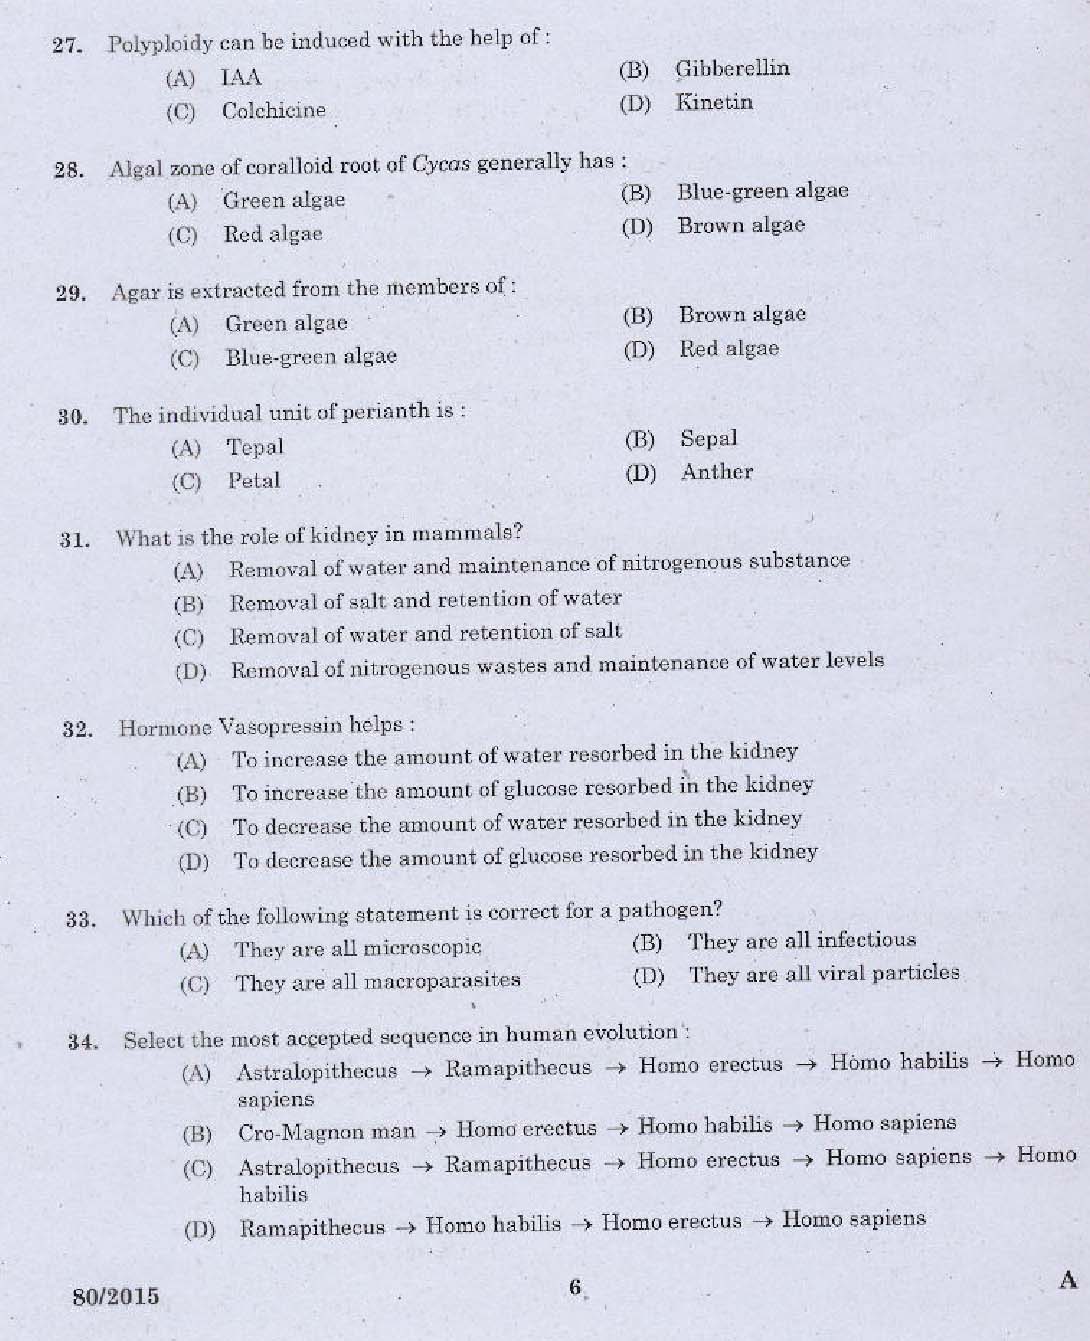 Kerala PSC Station Officer Exam Question Code 802015 4